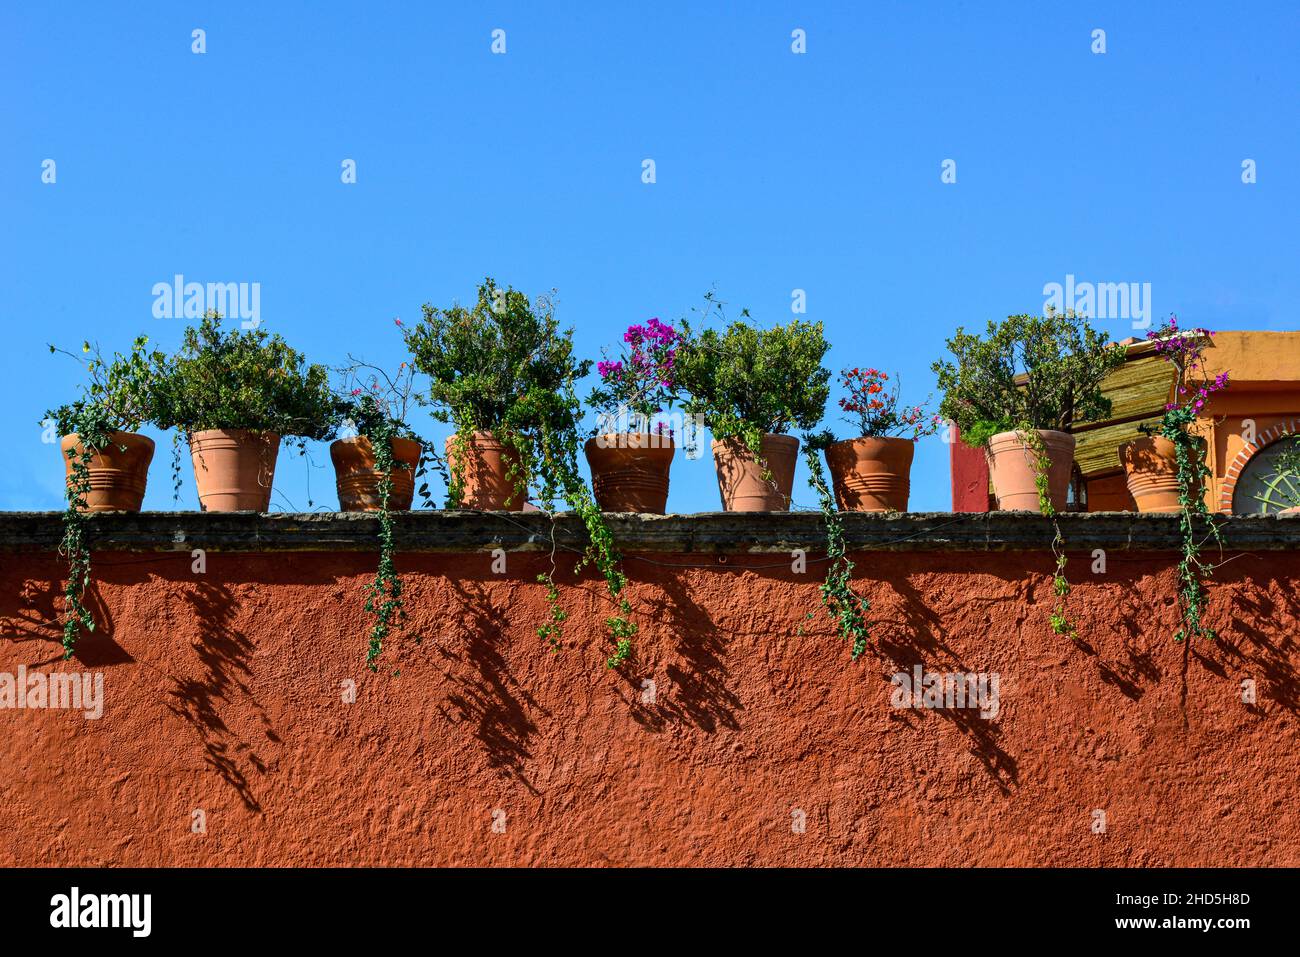 A close-up panoramic format of a rooftop garden with terra cotta pots along the flat roofline with blooming plants  in San Miguel de Allende, Mexico Stock Photo